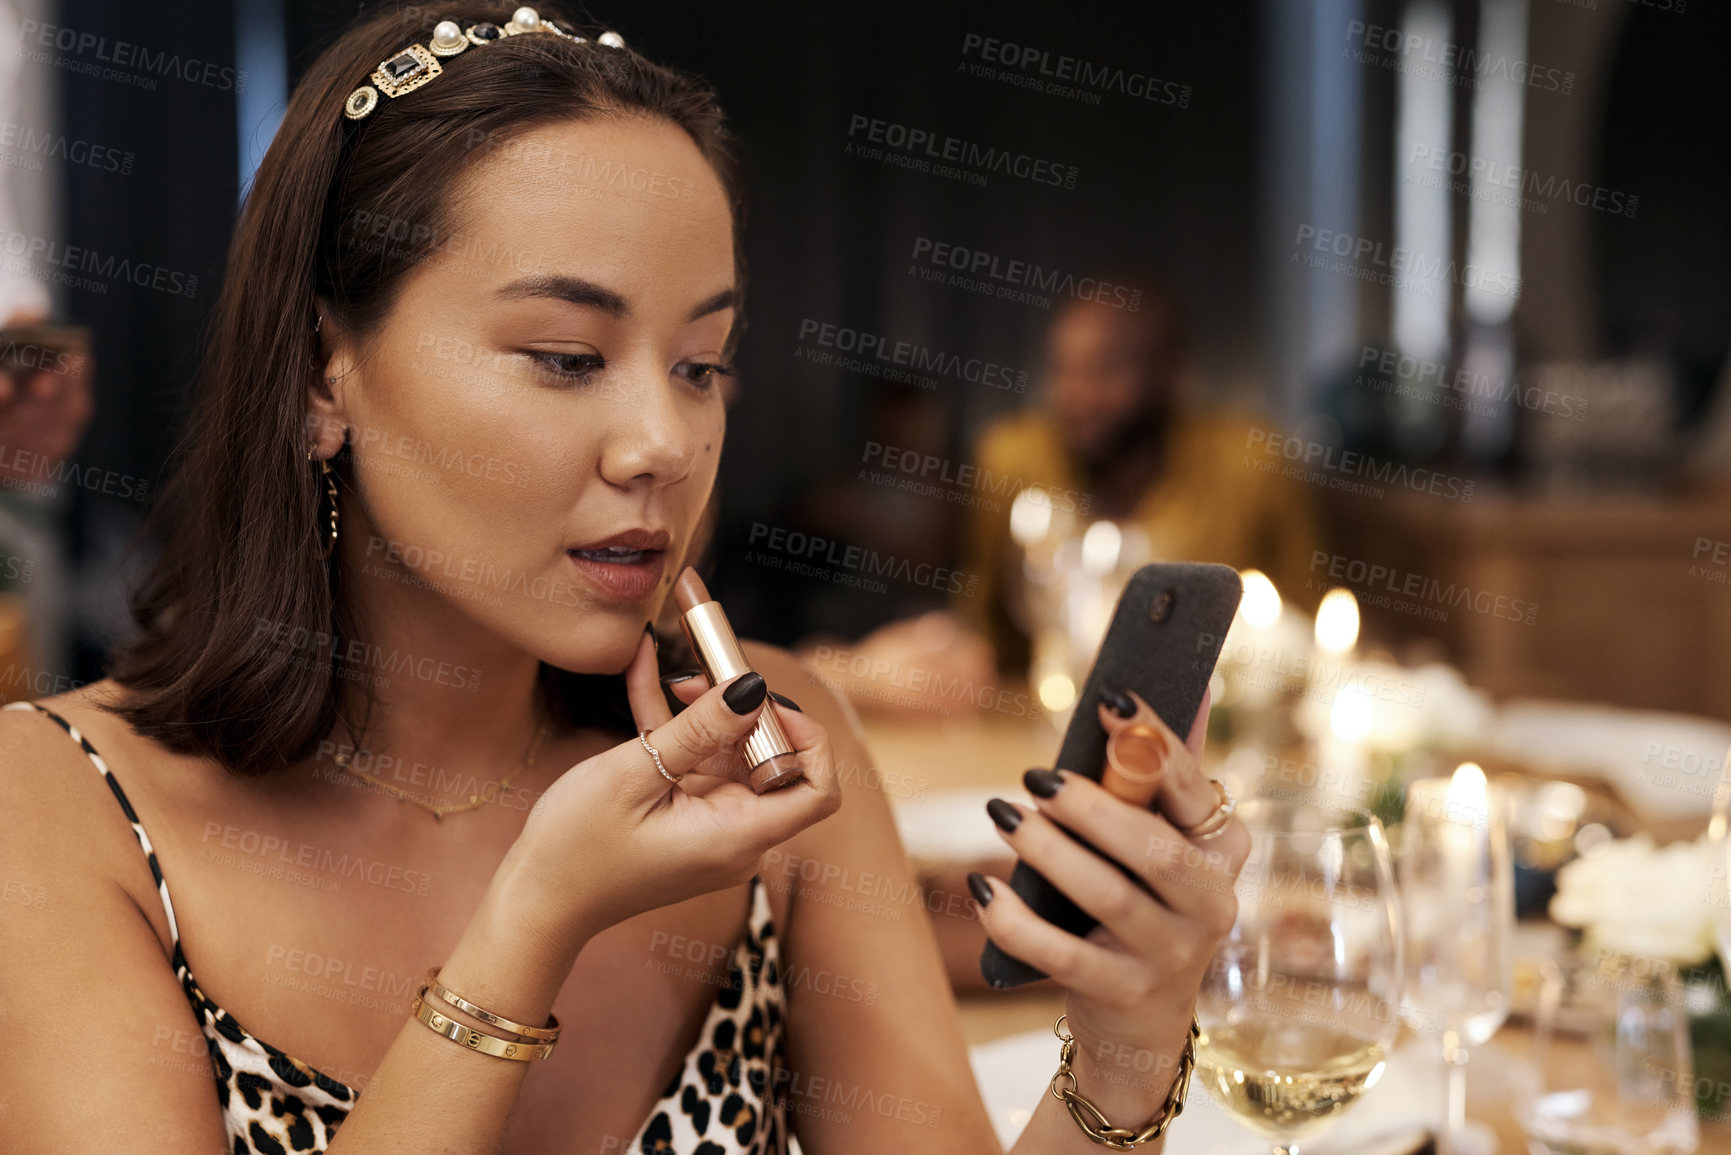 Buy stock photo Shot of an attractive young woman sitting alone and applying lipstick during a New Year's dinner party